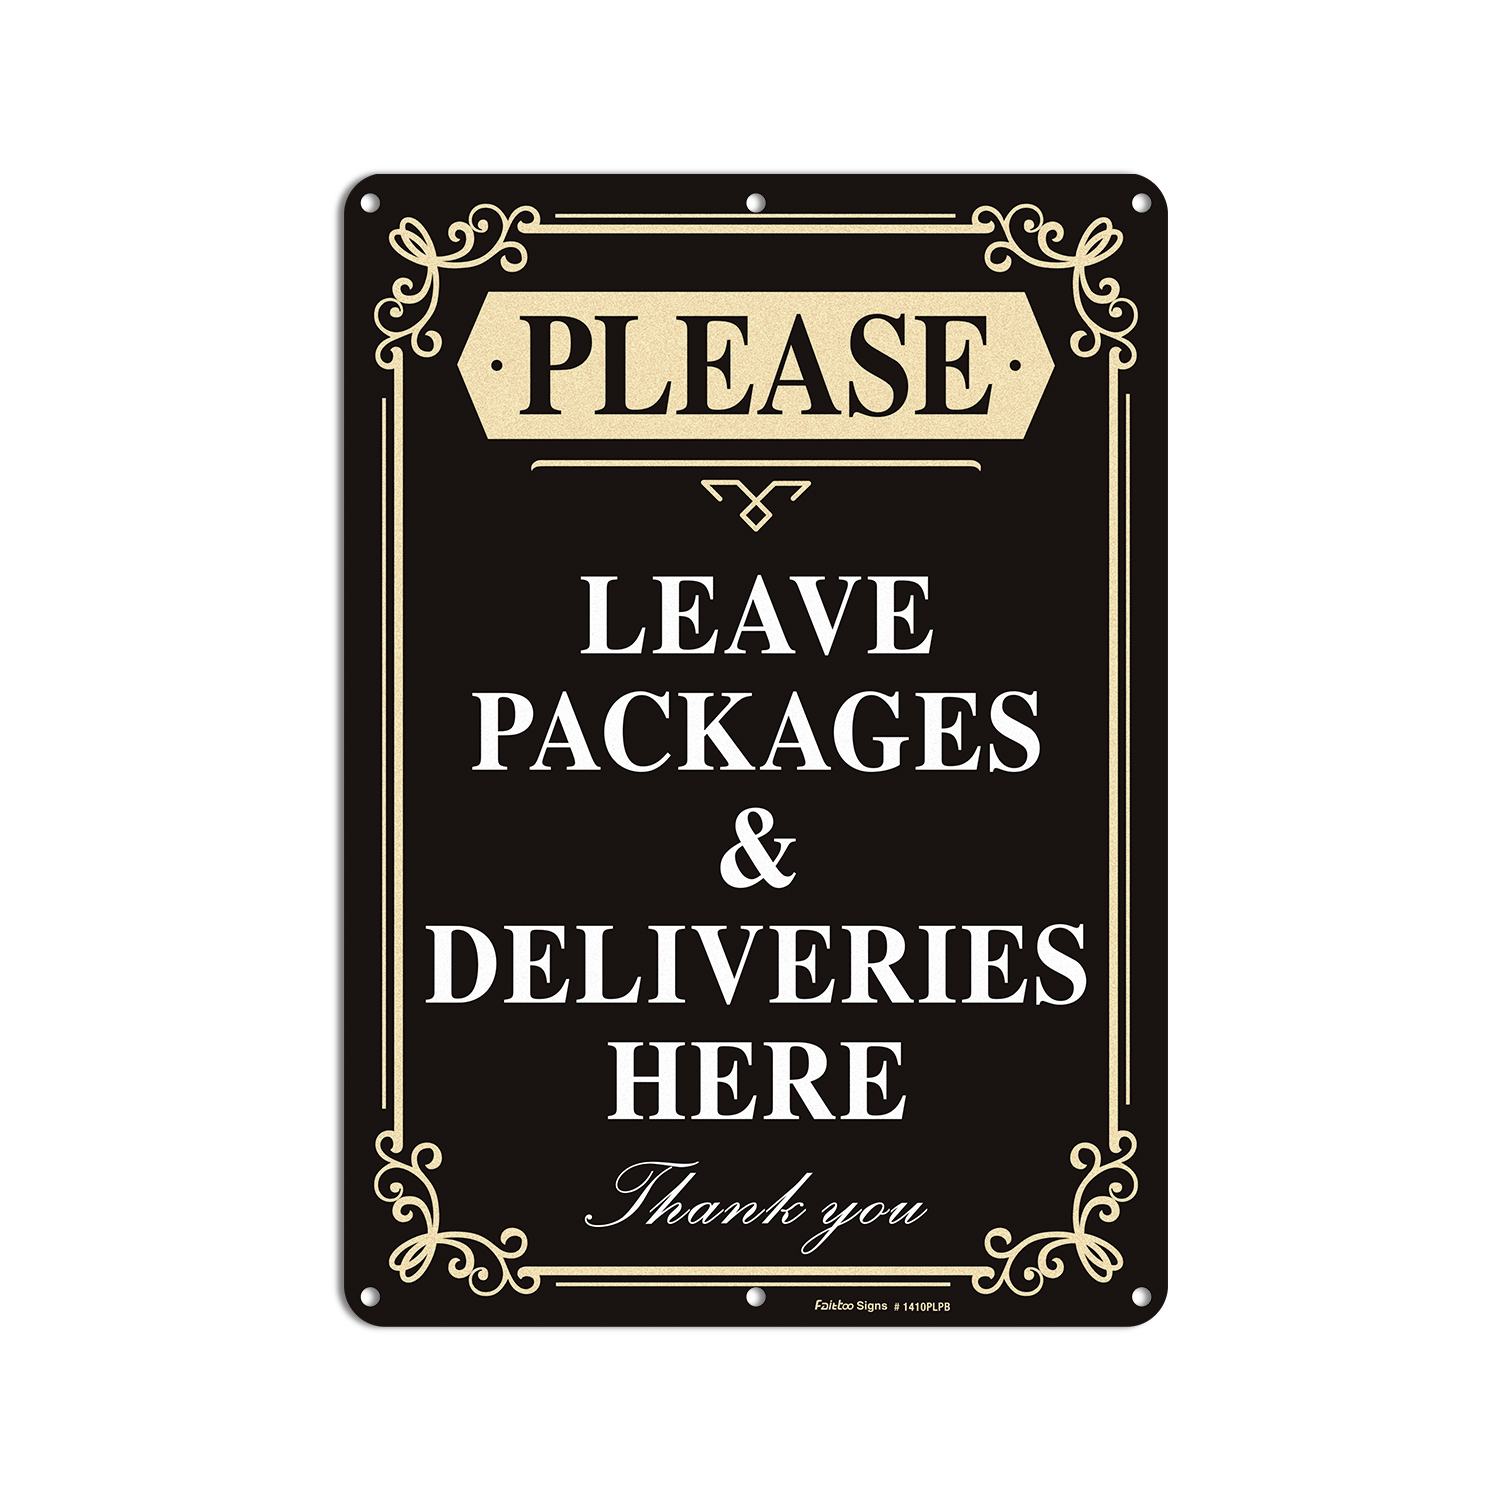 Faittoo Please Leave Packages and Deliveries Here Sign, 2-Pack 14 x 10 Inch Reflective Aluminum Sign, UV Protected and Weatherproof, Durable Ink, Easy to Install and Read, Indoor/ Outdoors Use